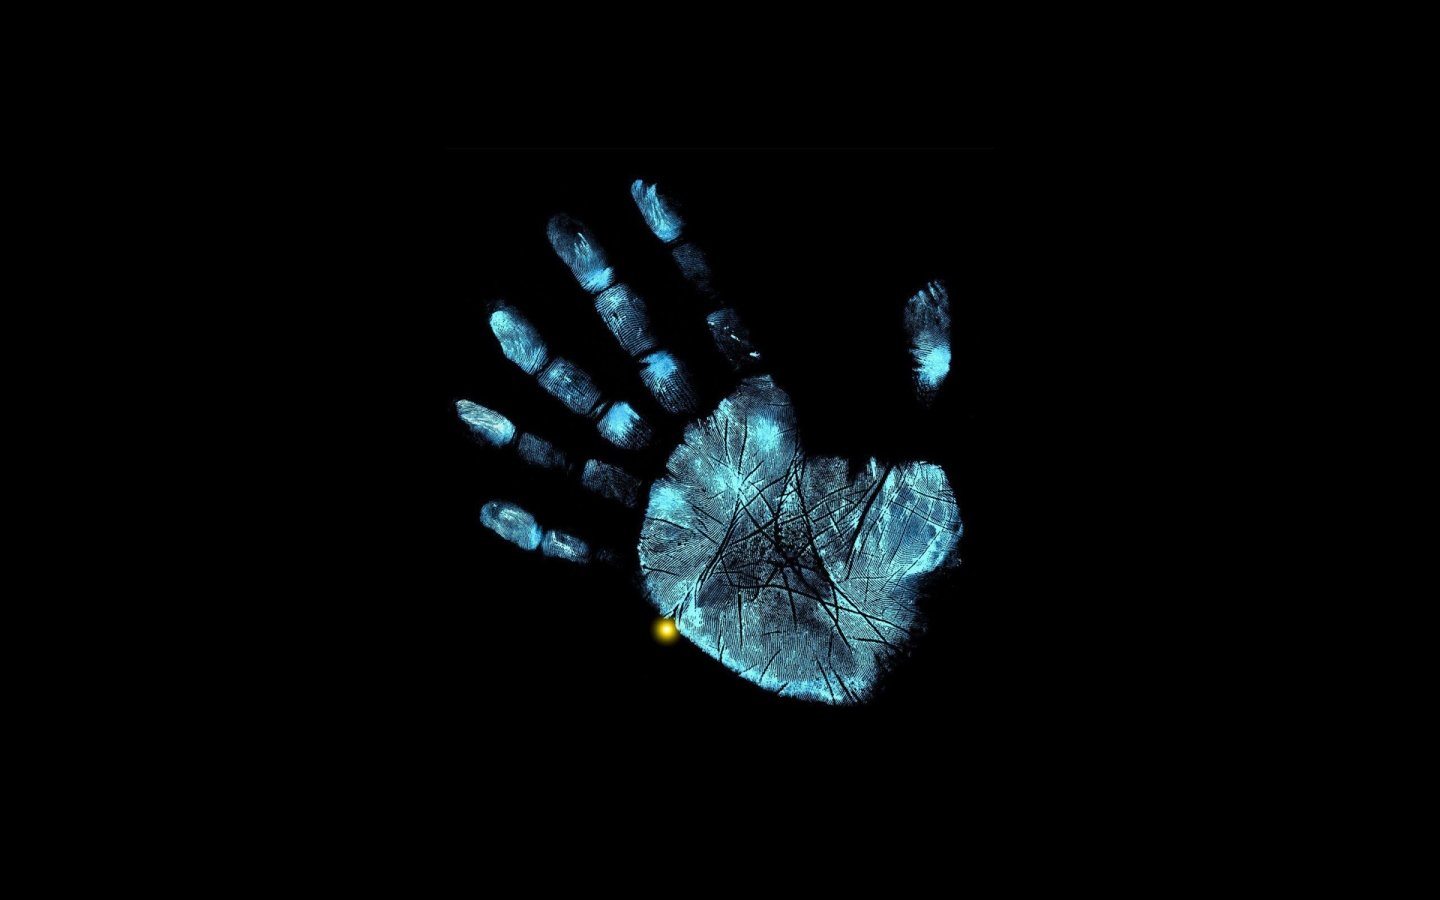 Abnormal Hand for 1440 x 900 widescreen resolution